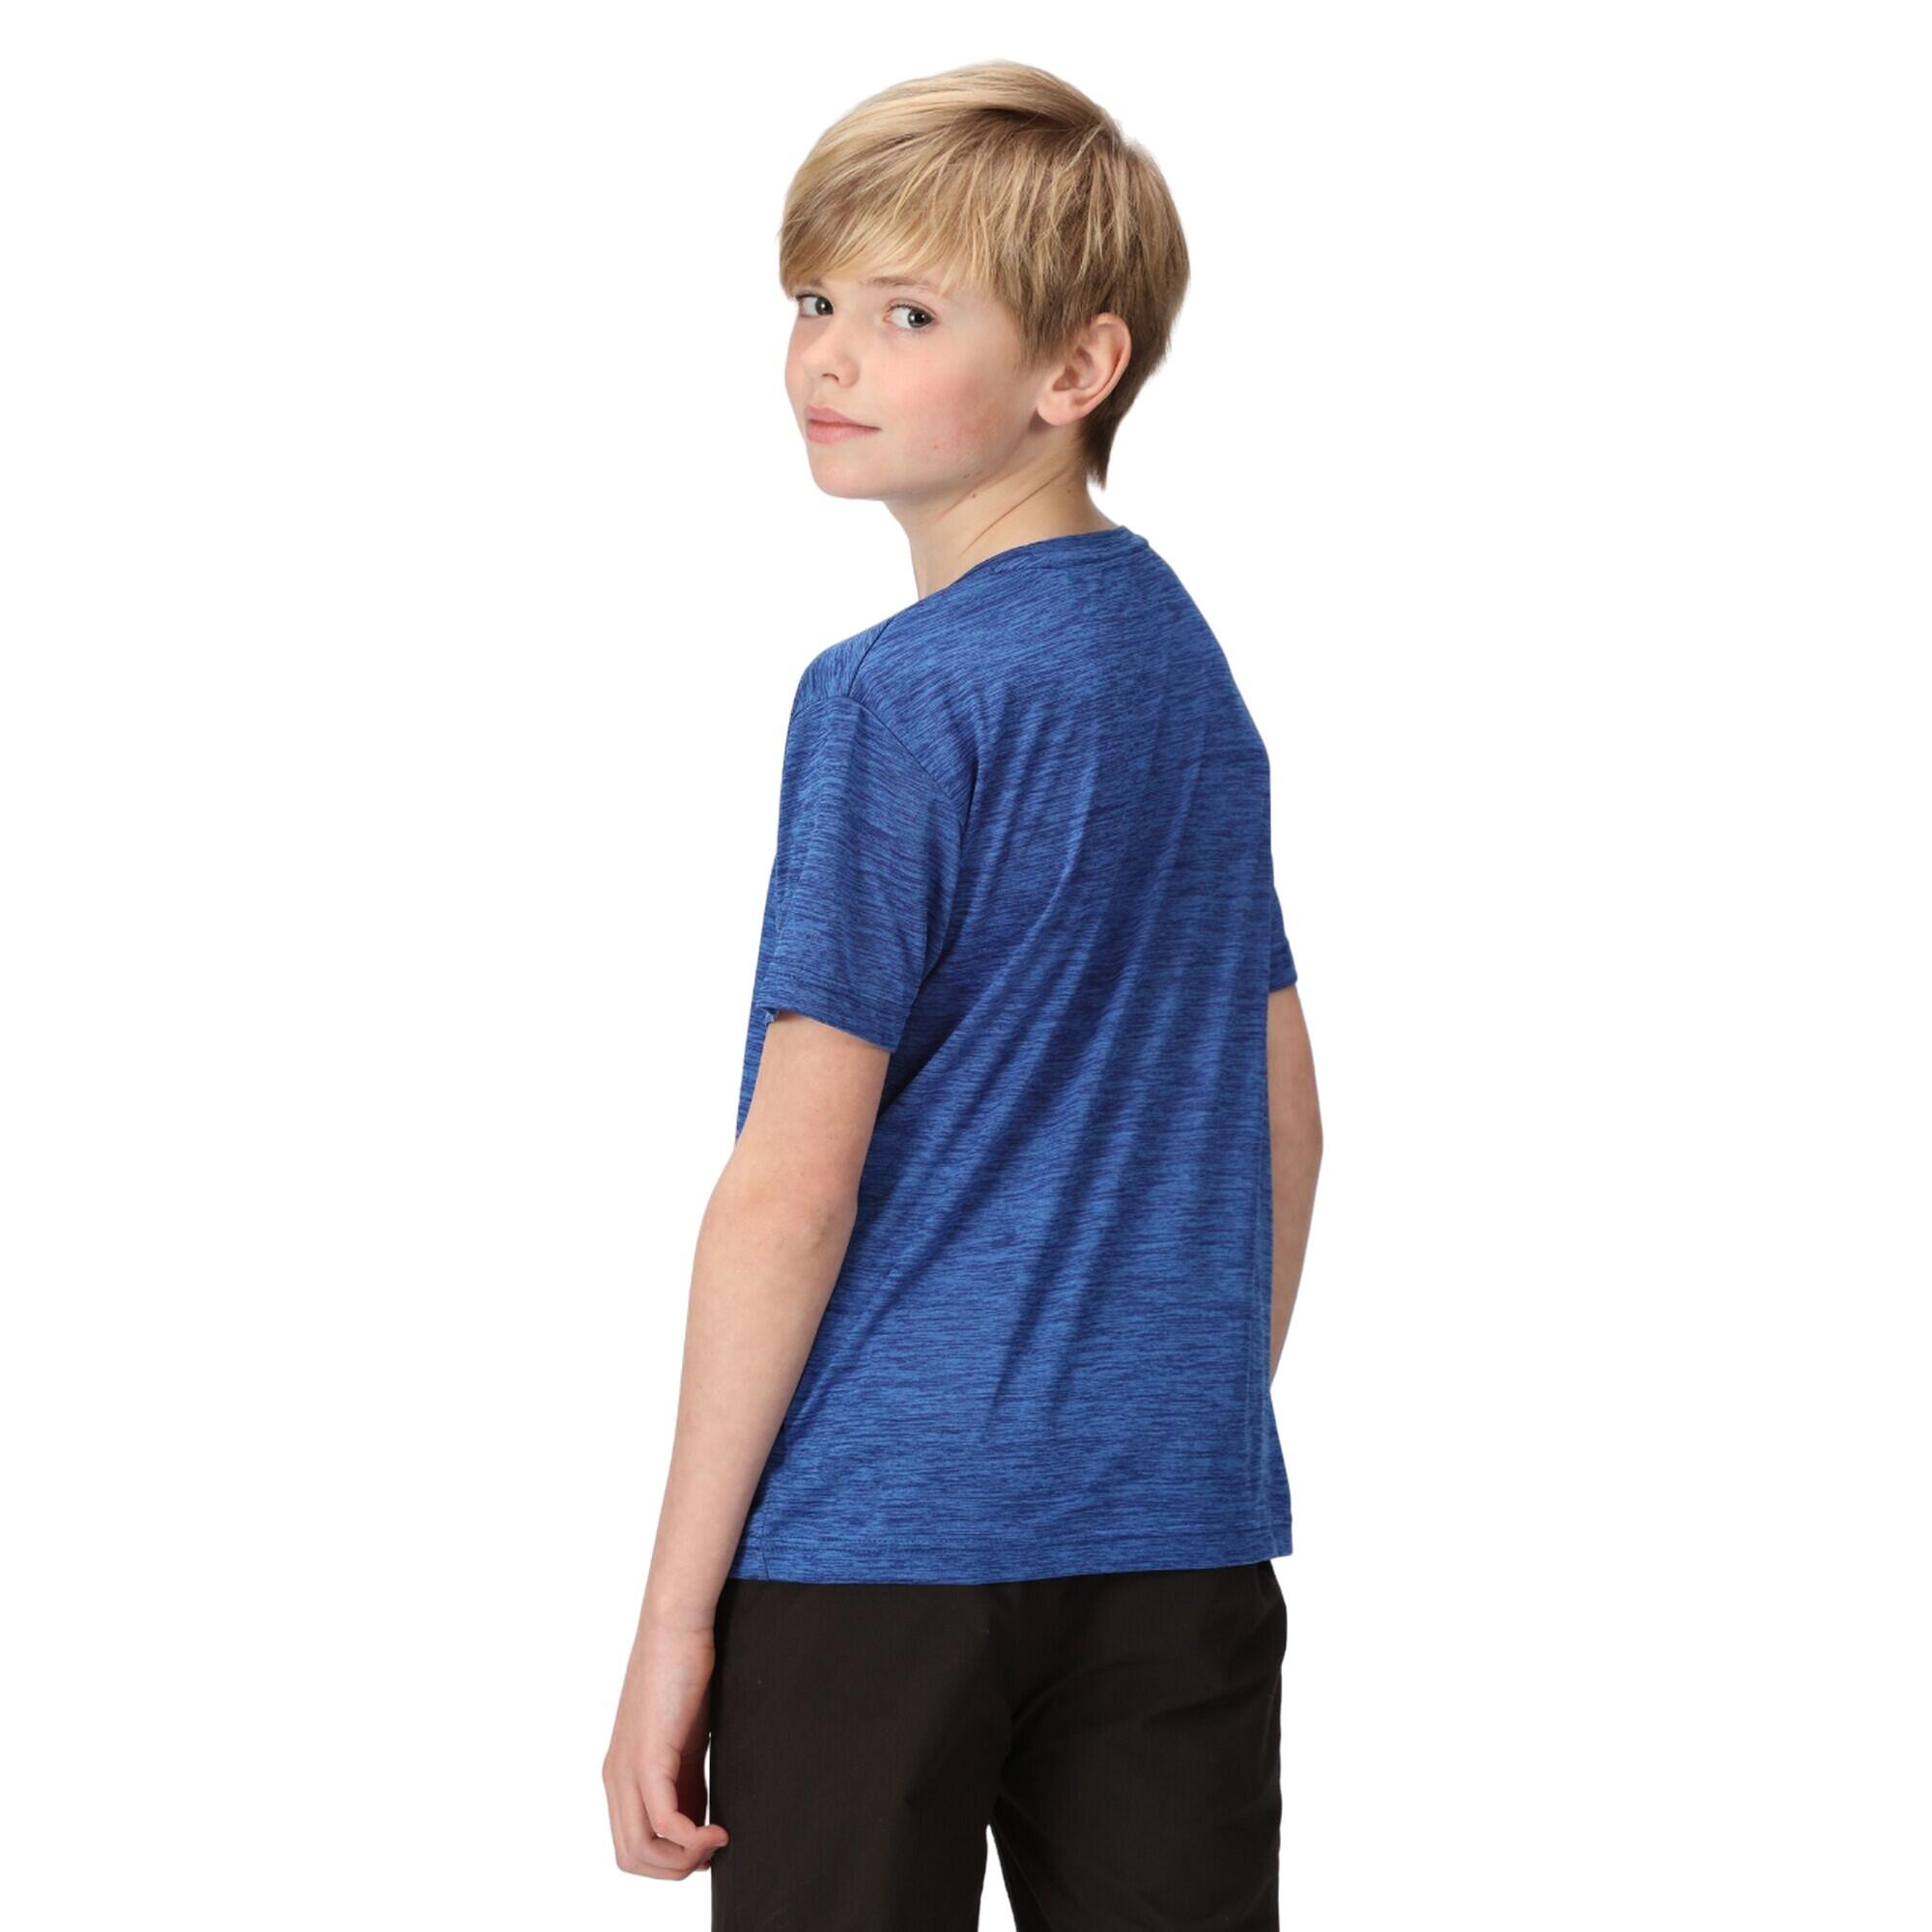 Childrens/Kids Findley Graphic Print Marl TShirt (Strong Blue) 3/5